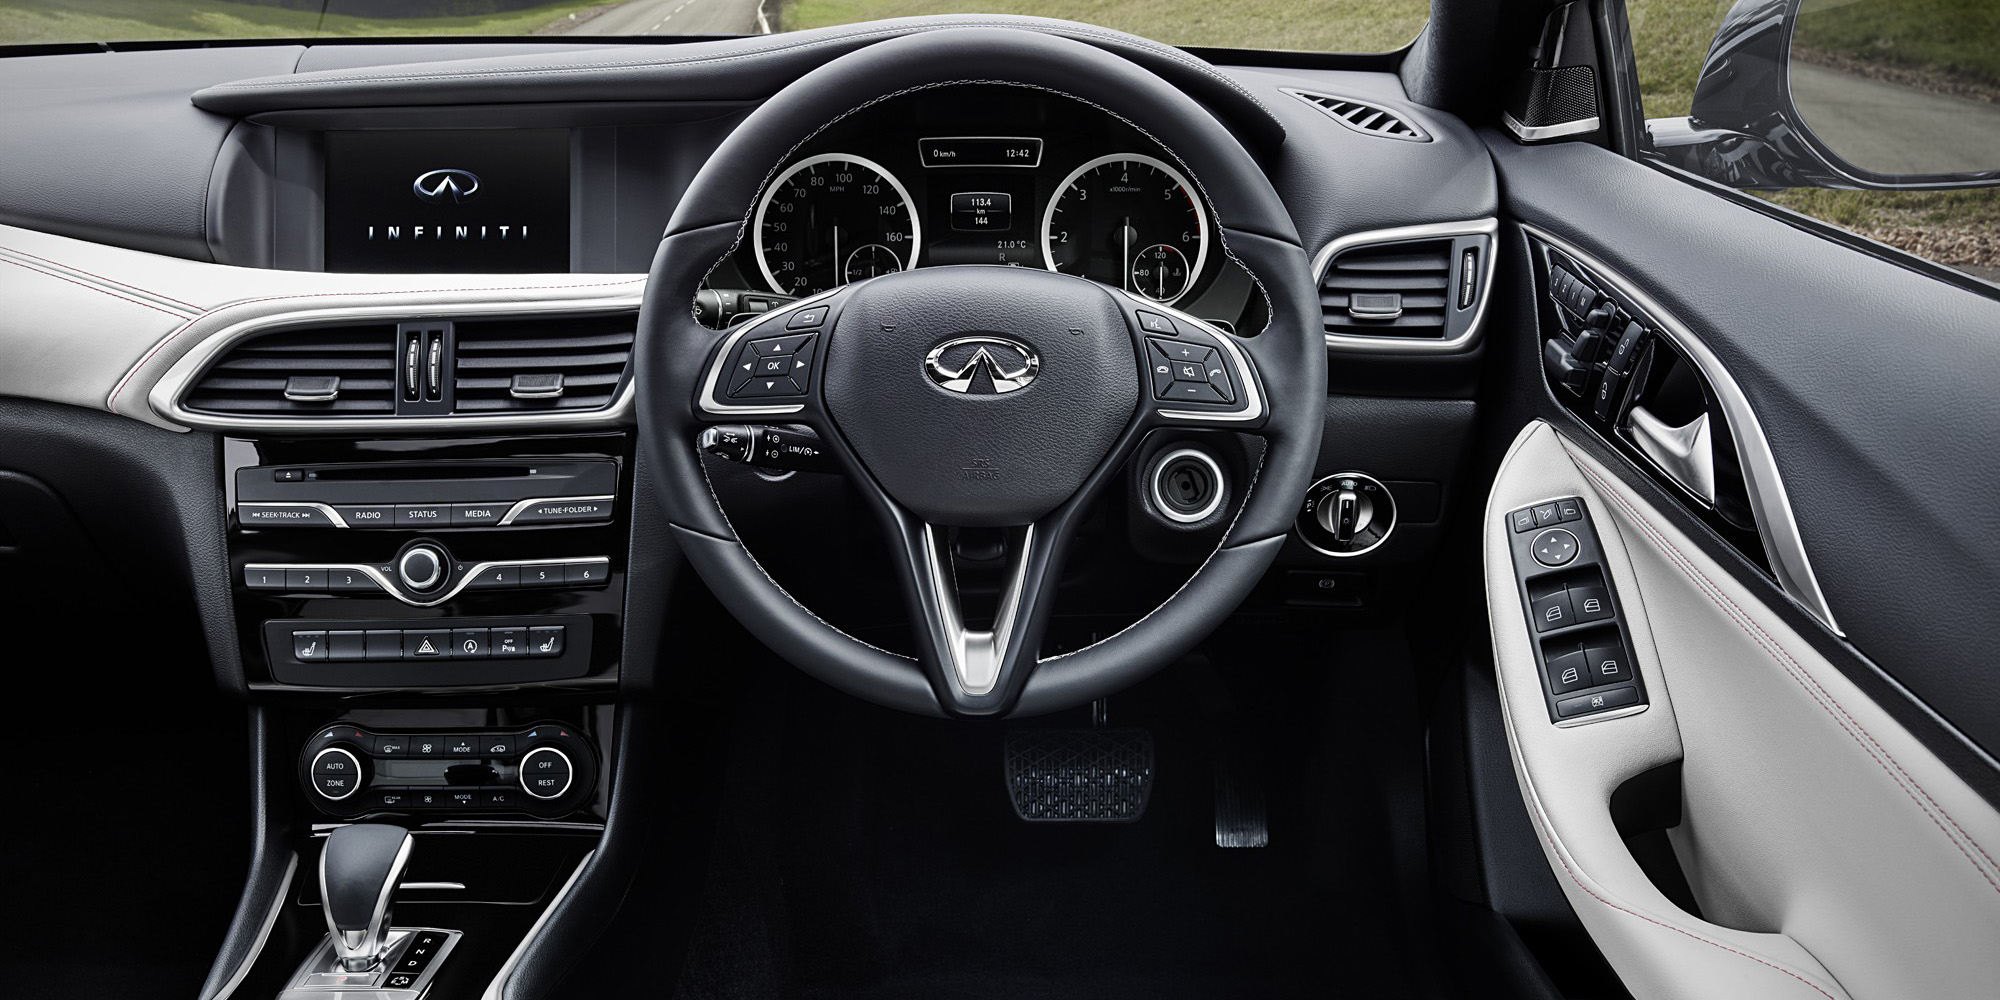 The Q30's cabin looks similar to the Mercedes A-Class, but feels more luxurious